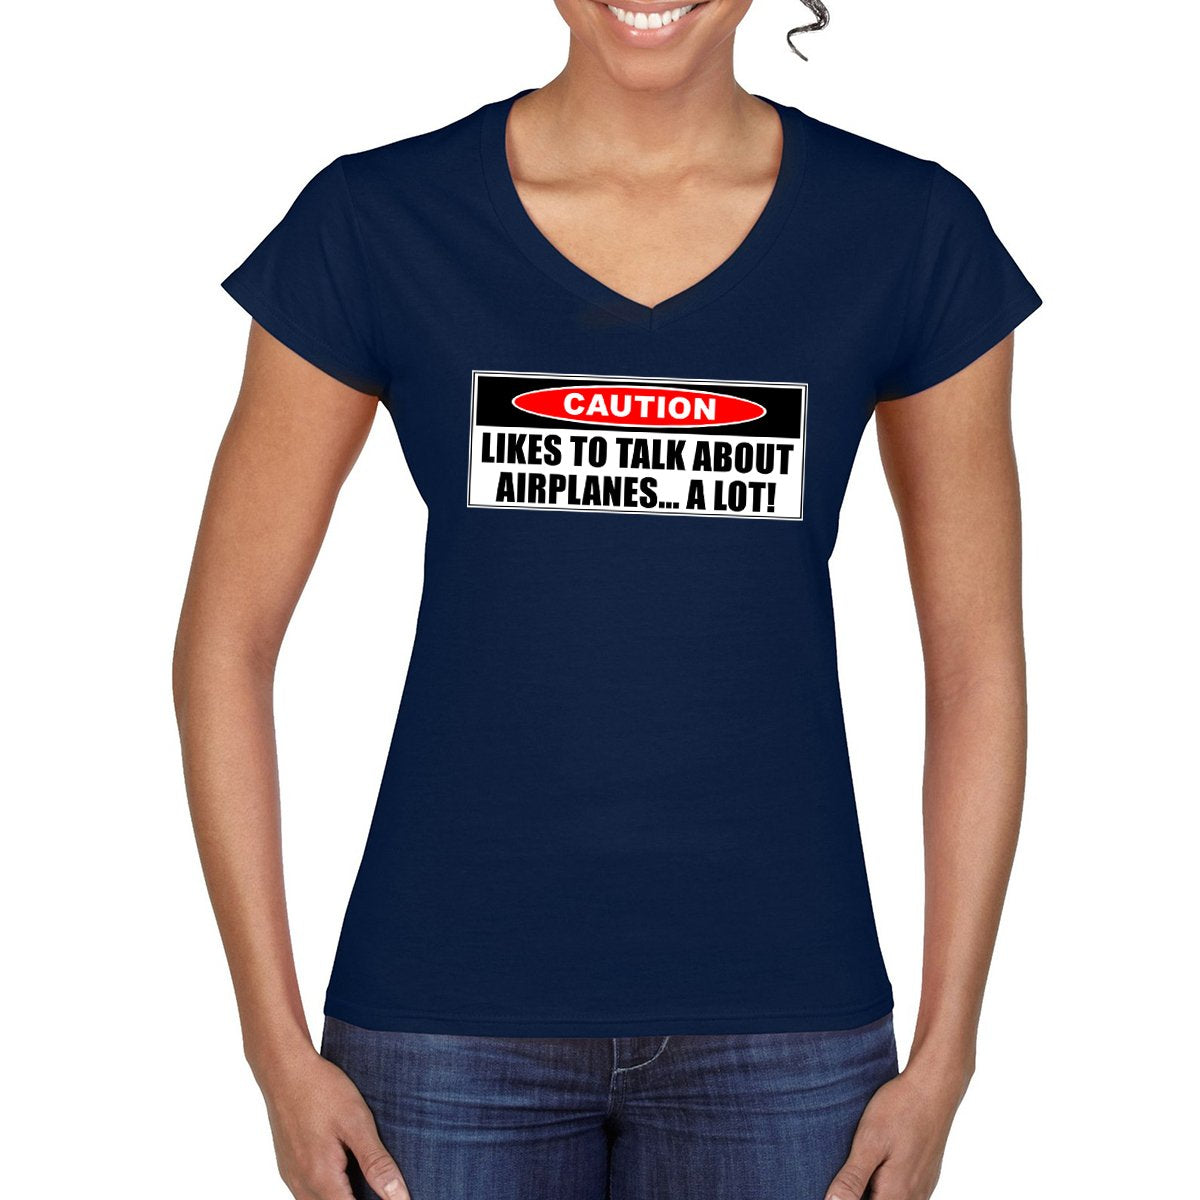 CAUTION Women's Semi-Fitted T-Shirt